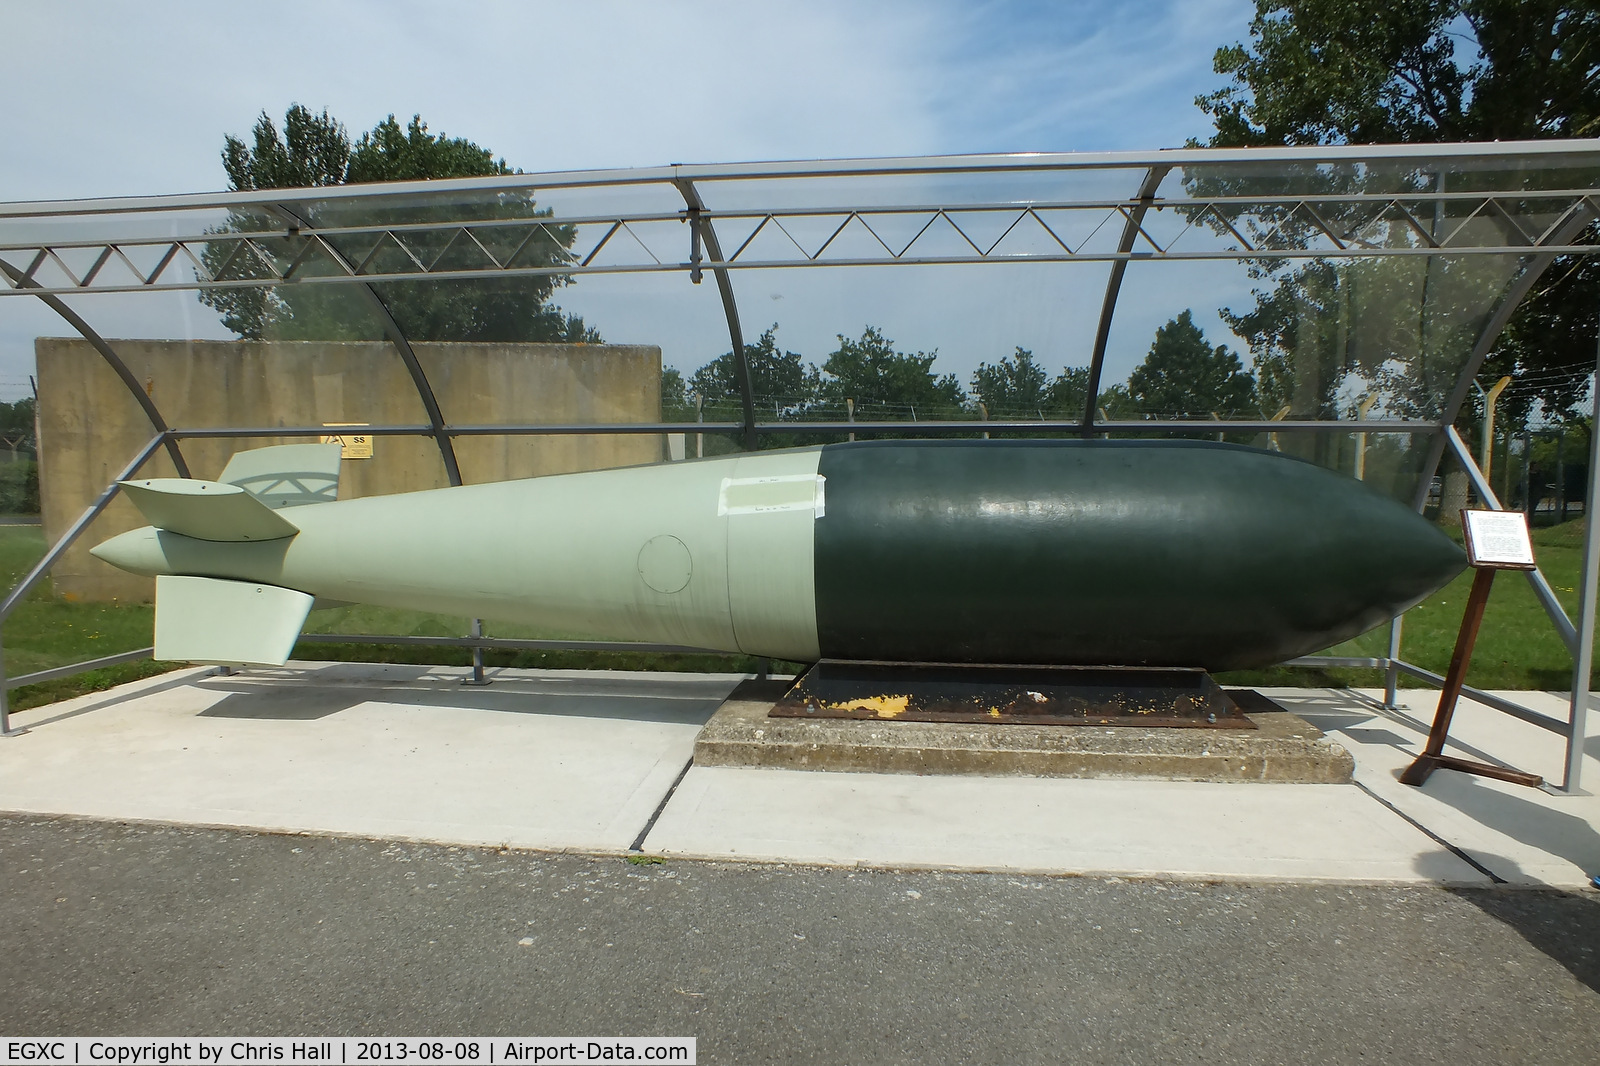 RAF Coningsby Airport, Coningsby, England United Kingdom (EGXC) - 12,000lb Tallboy bomb that was used to sink the German battleship Tirpitz on 12 November 1944, displayed at the BBMF visitors centre